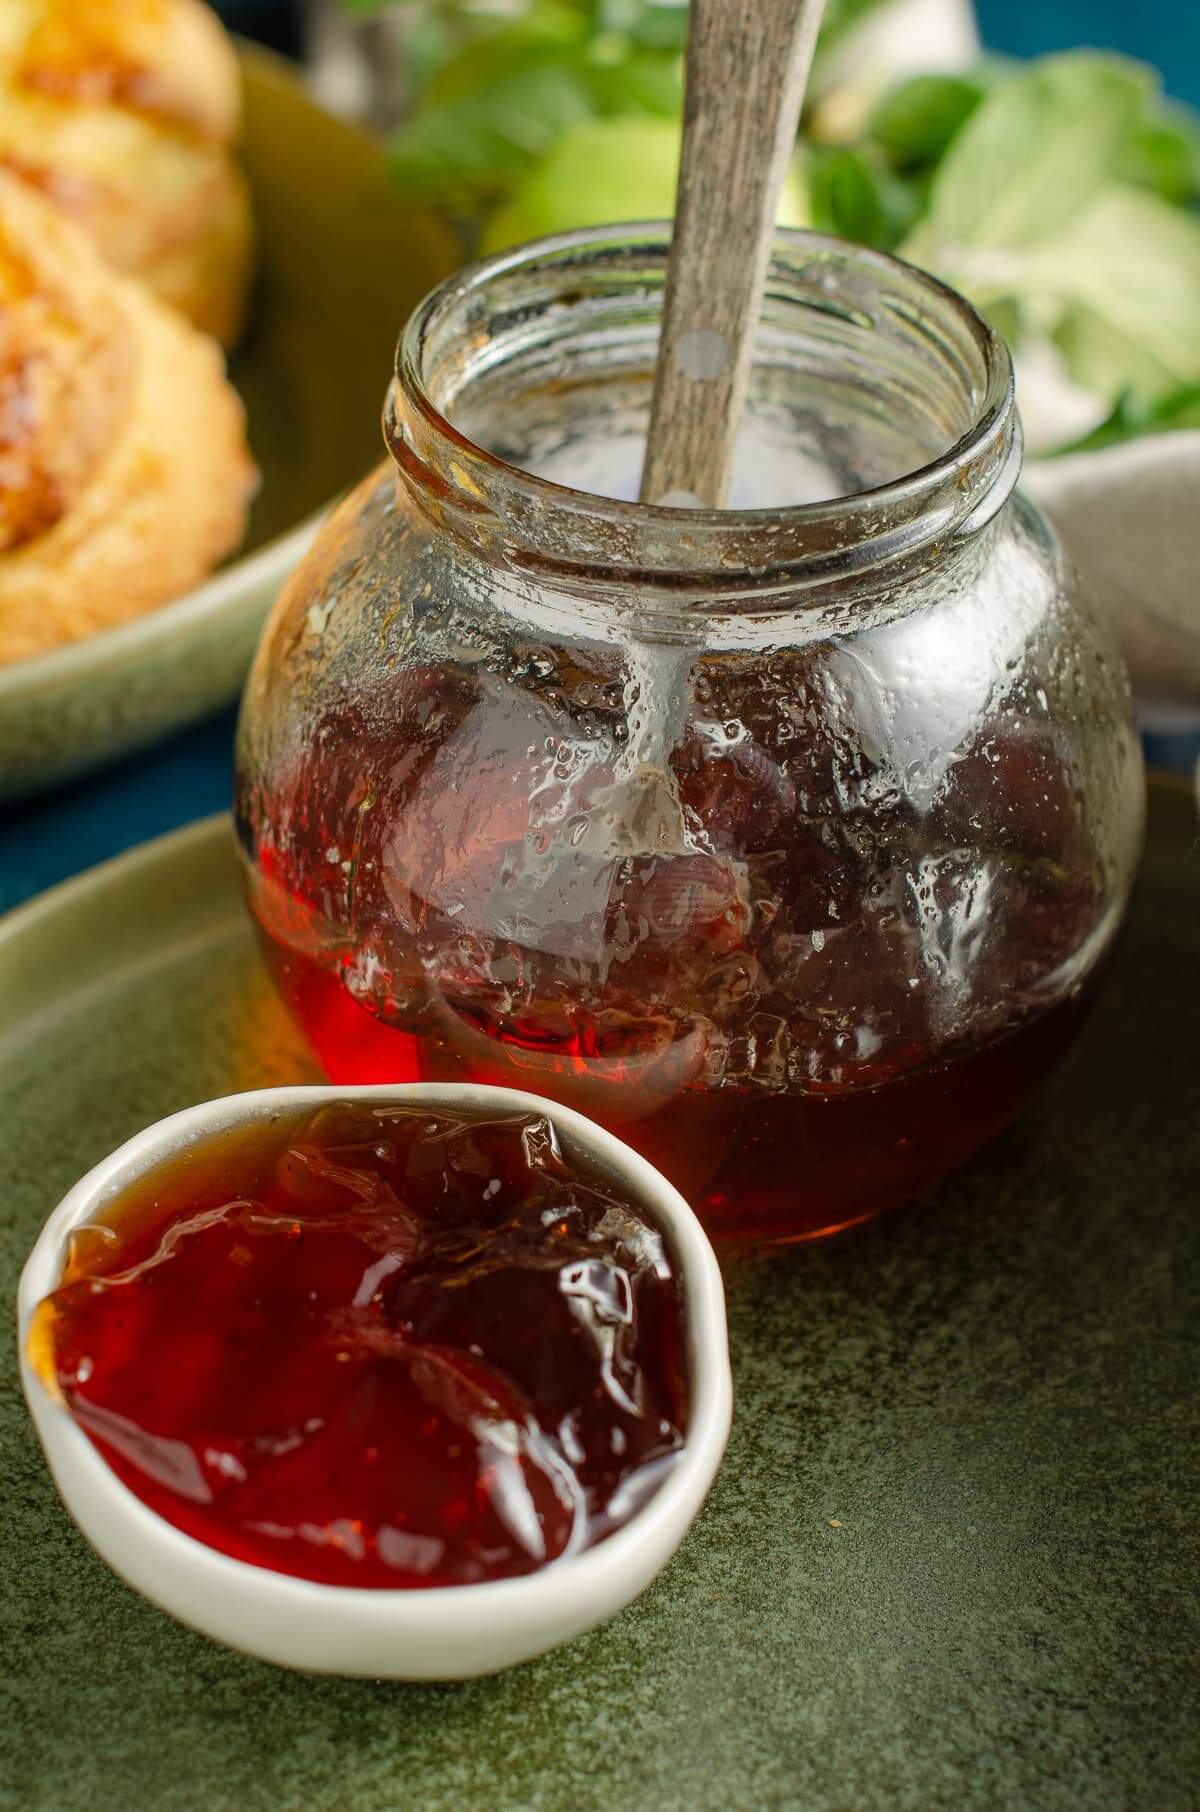 A round bellied jar of apple jelly jam half full with a spoon inside and a small serving bowl of jam in front.